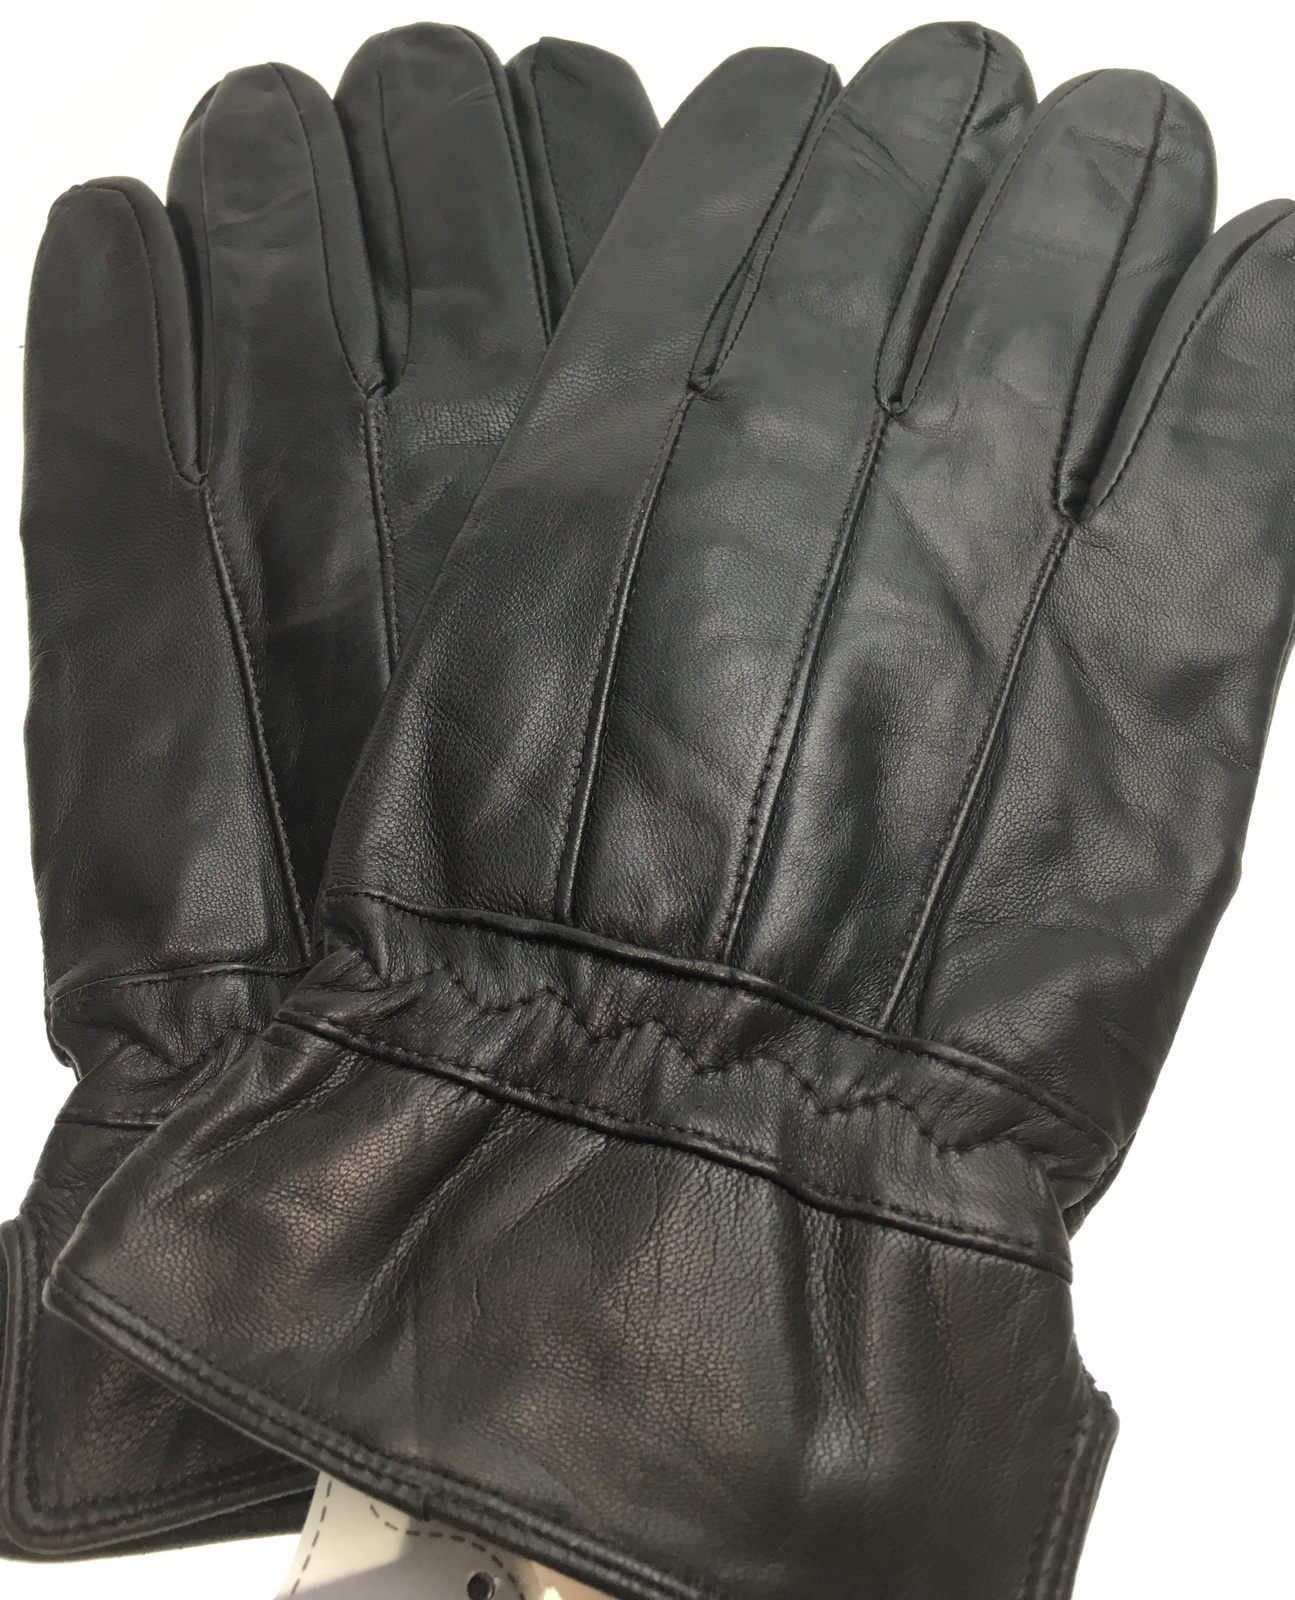 3M THINSULATE Men's Genuine Leather Gloves Patch Thermal Lining Warm ...